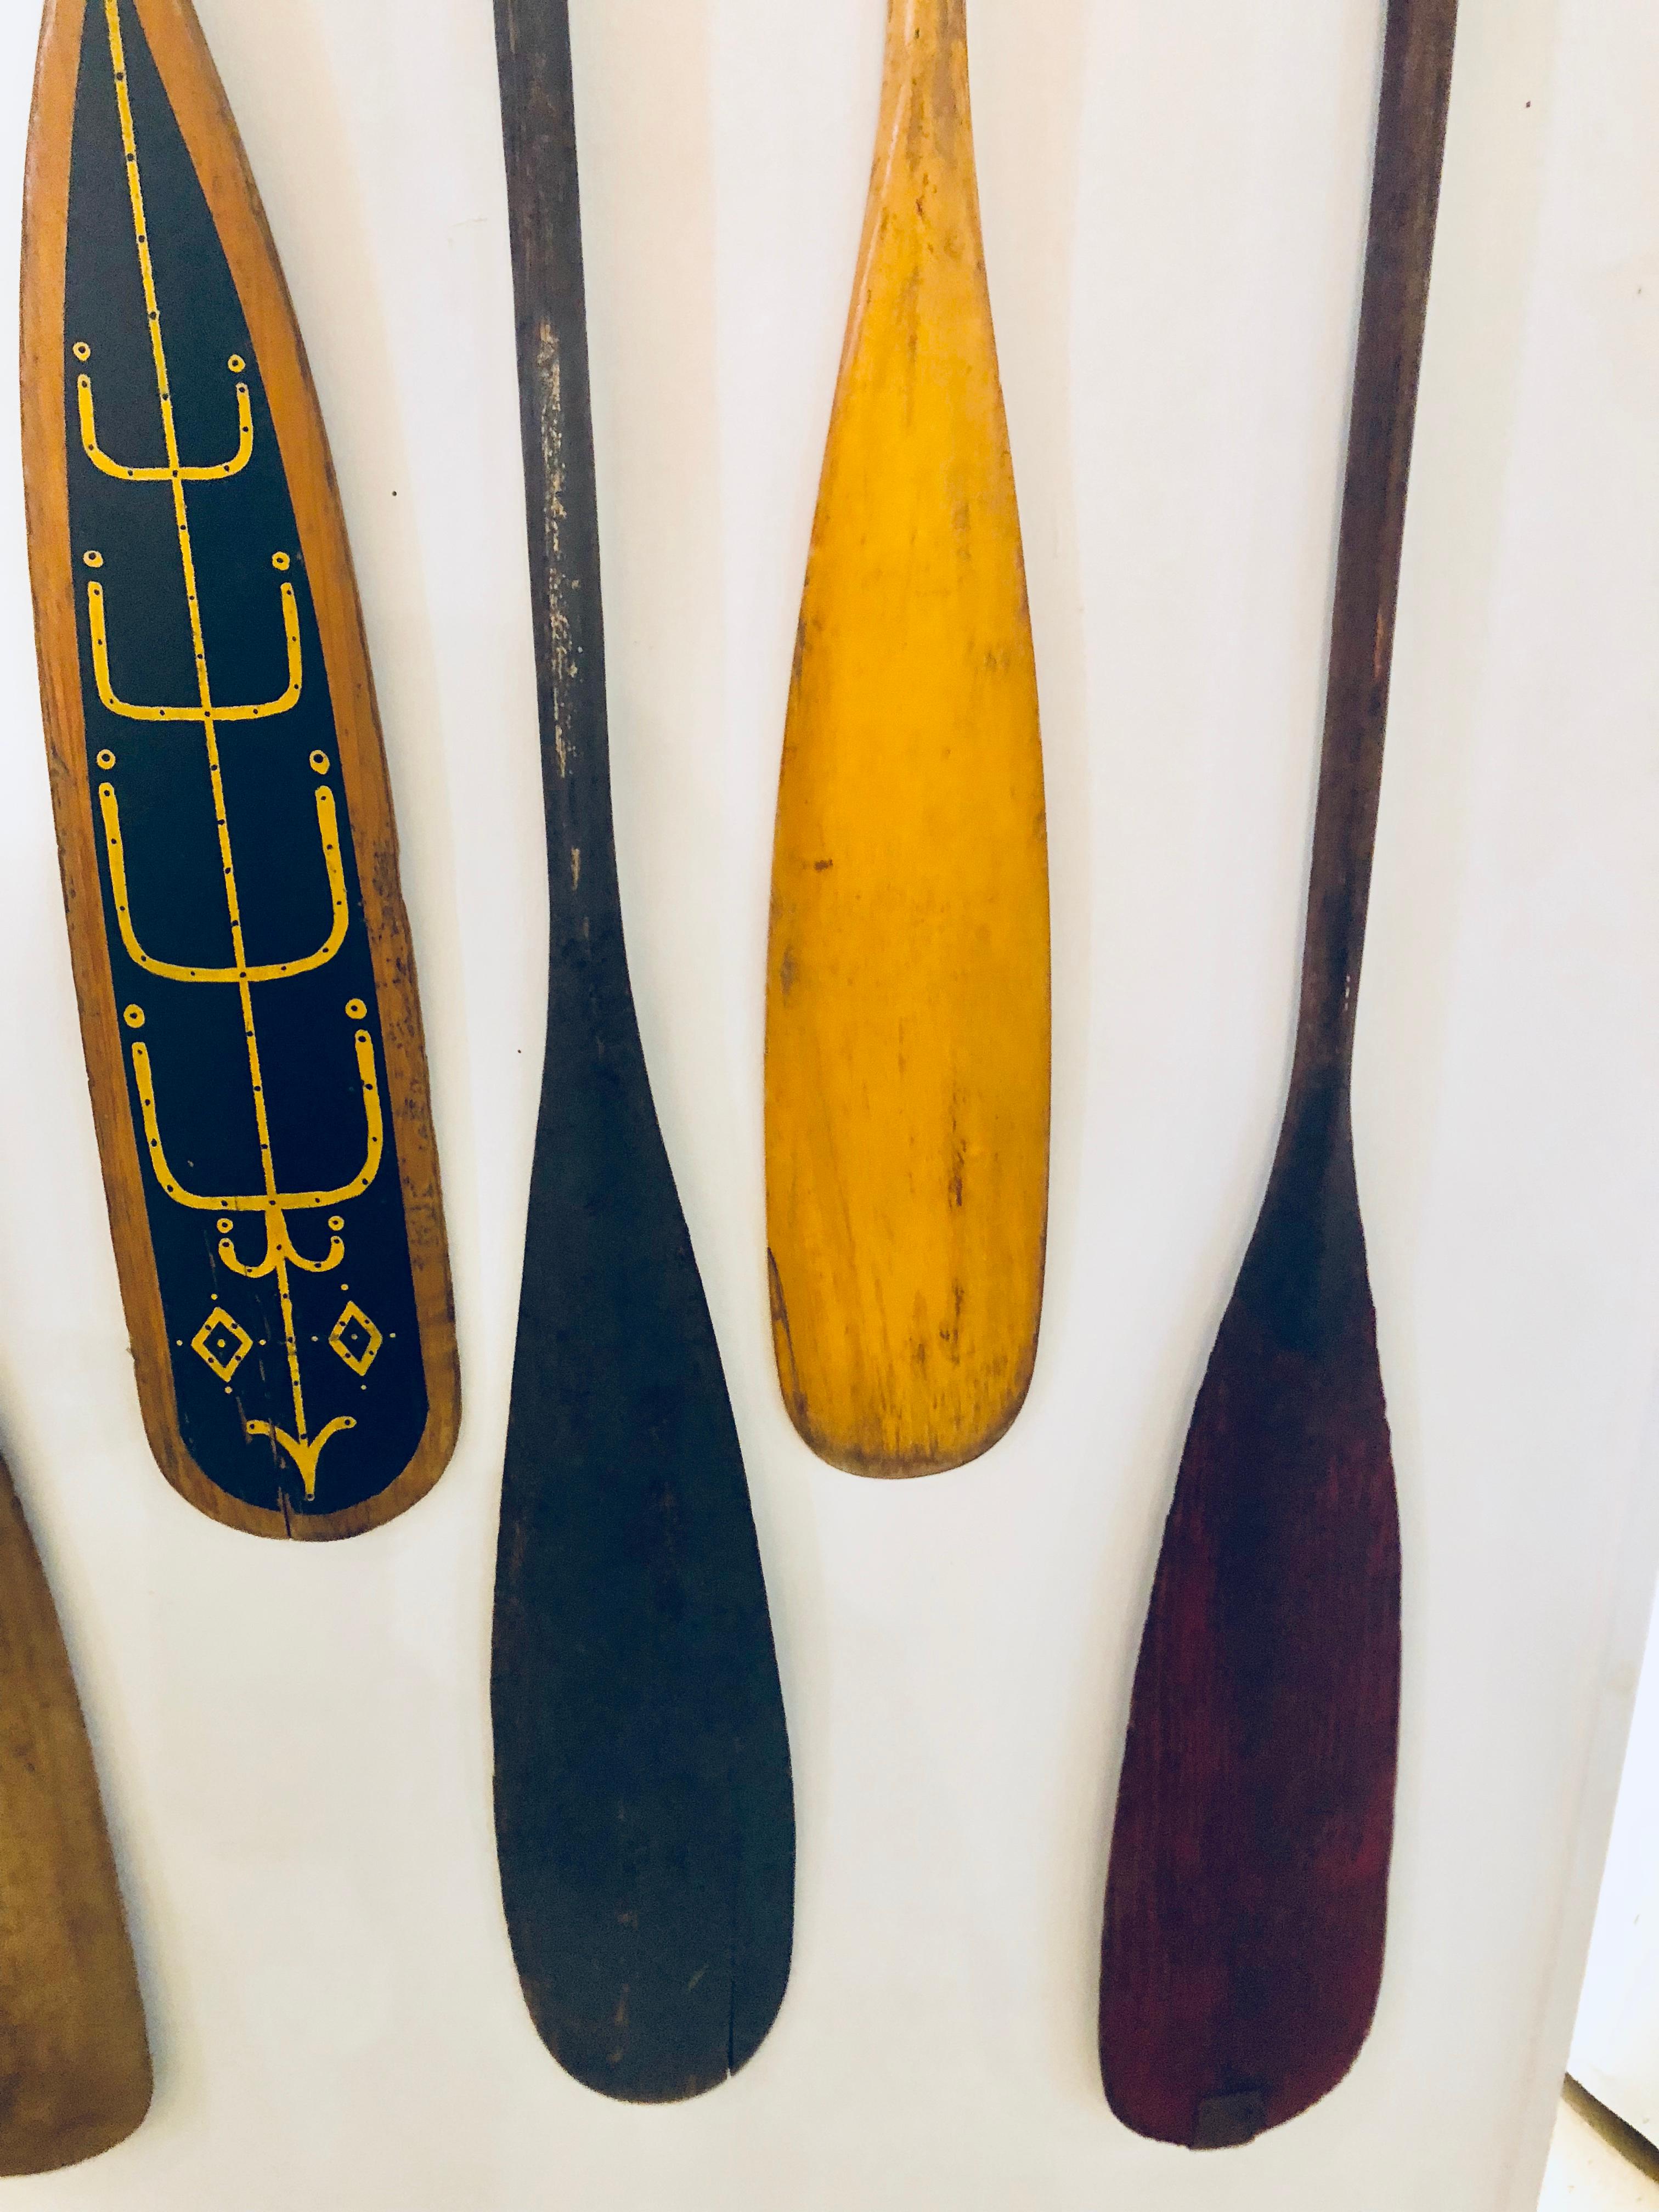 Folk Art Collection of Six Antique Wooden Canoe Paddles with Original Painted Surfaces